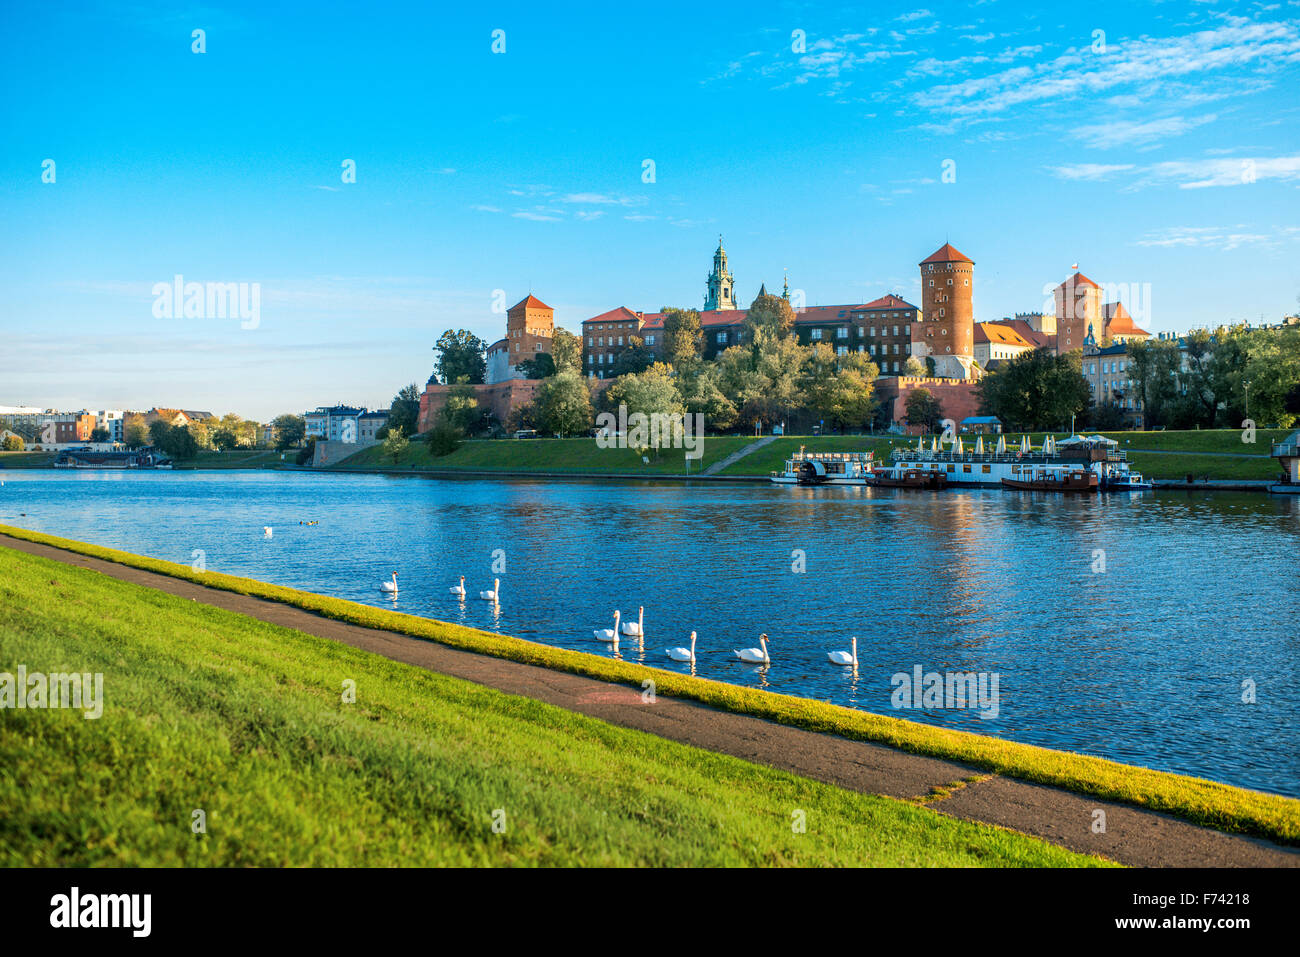 Beautiful view on Vistula river with swans swimming near Wawel castle in Krakow on the morning Stock Photo